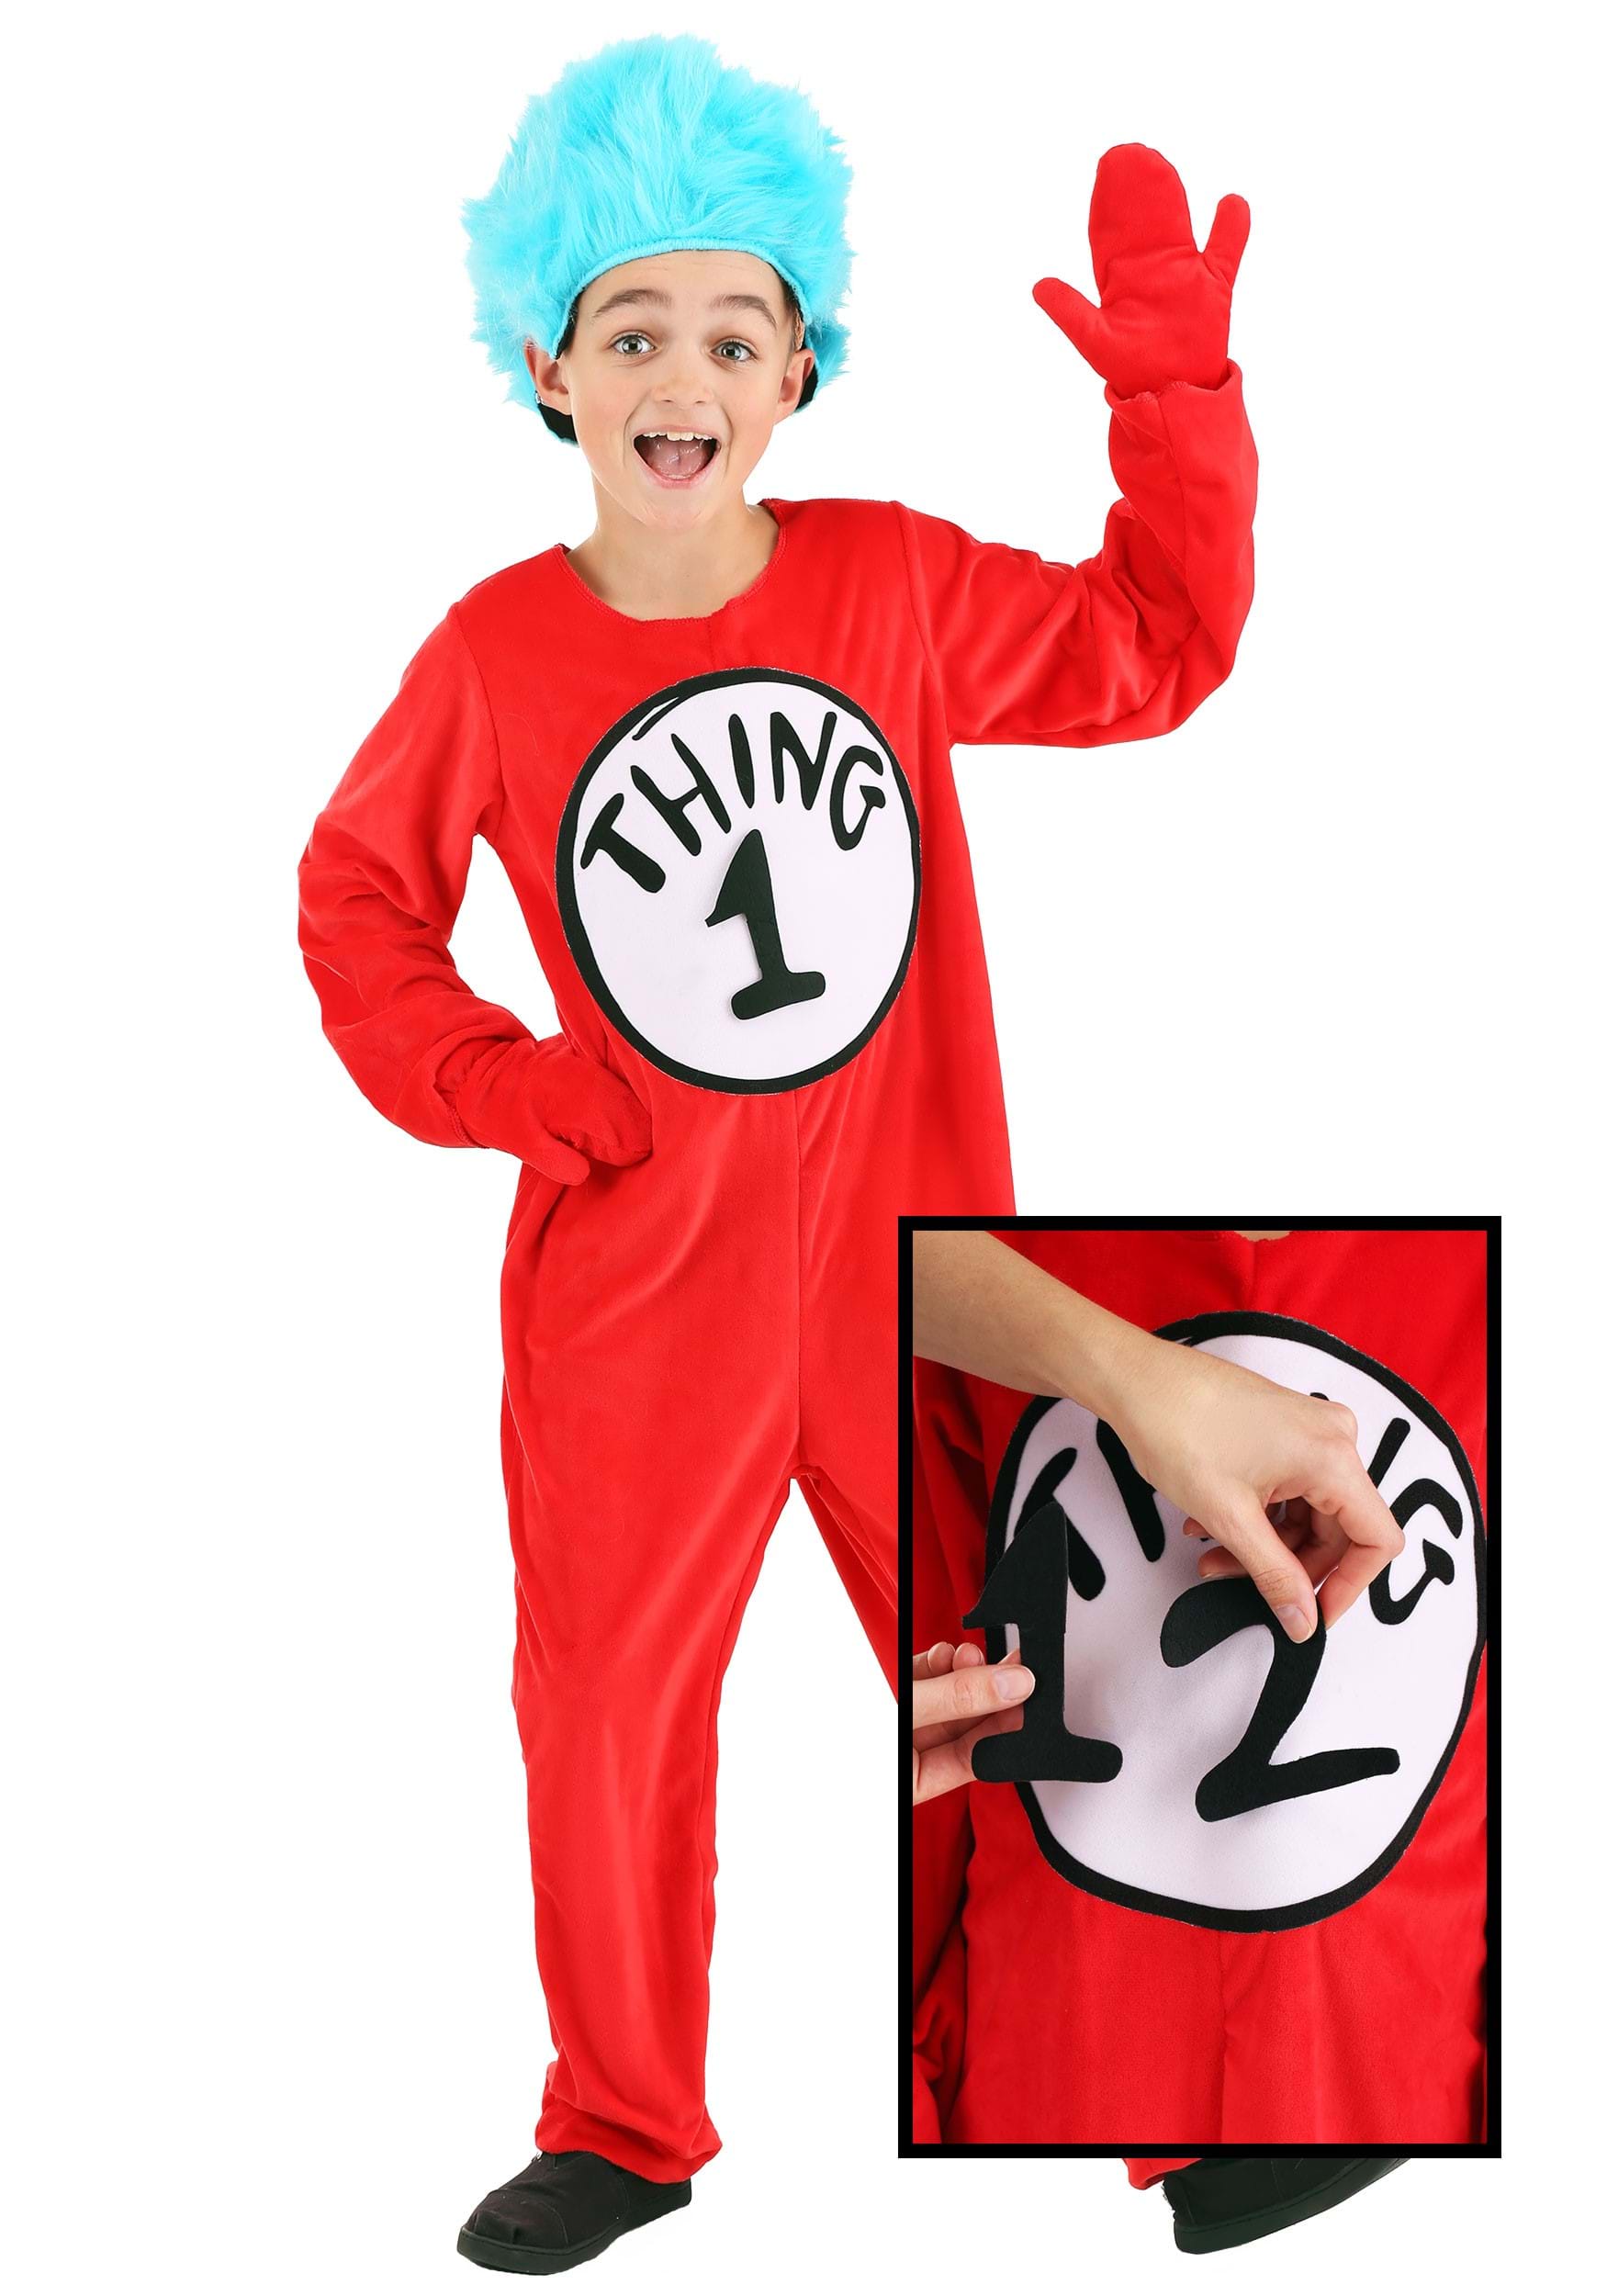 Photos - Fancy Dress Deluxe FUN Costumes Thing 1&2  Child Costume Red/Blue/White EL40062 